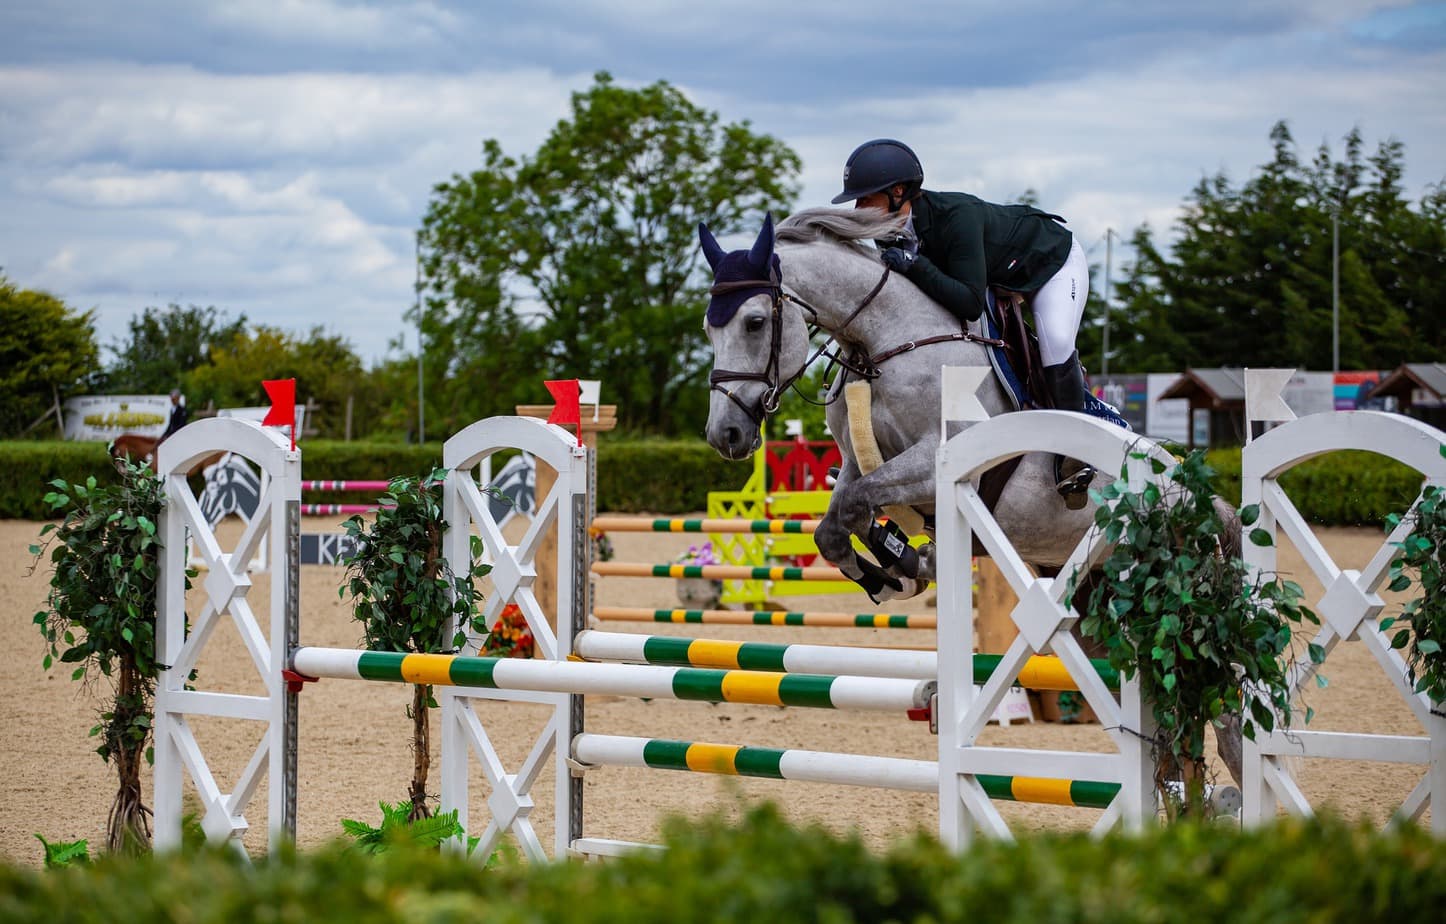 Equestrian disciplines – what are they and which one to opt for?